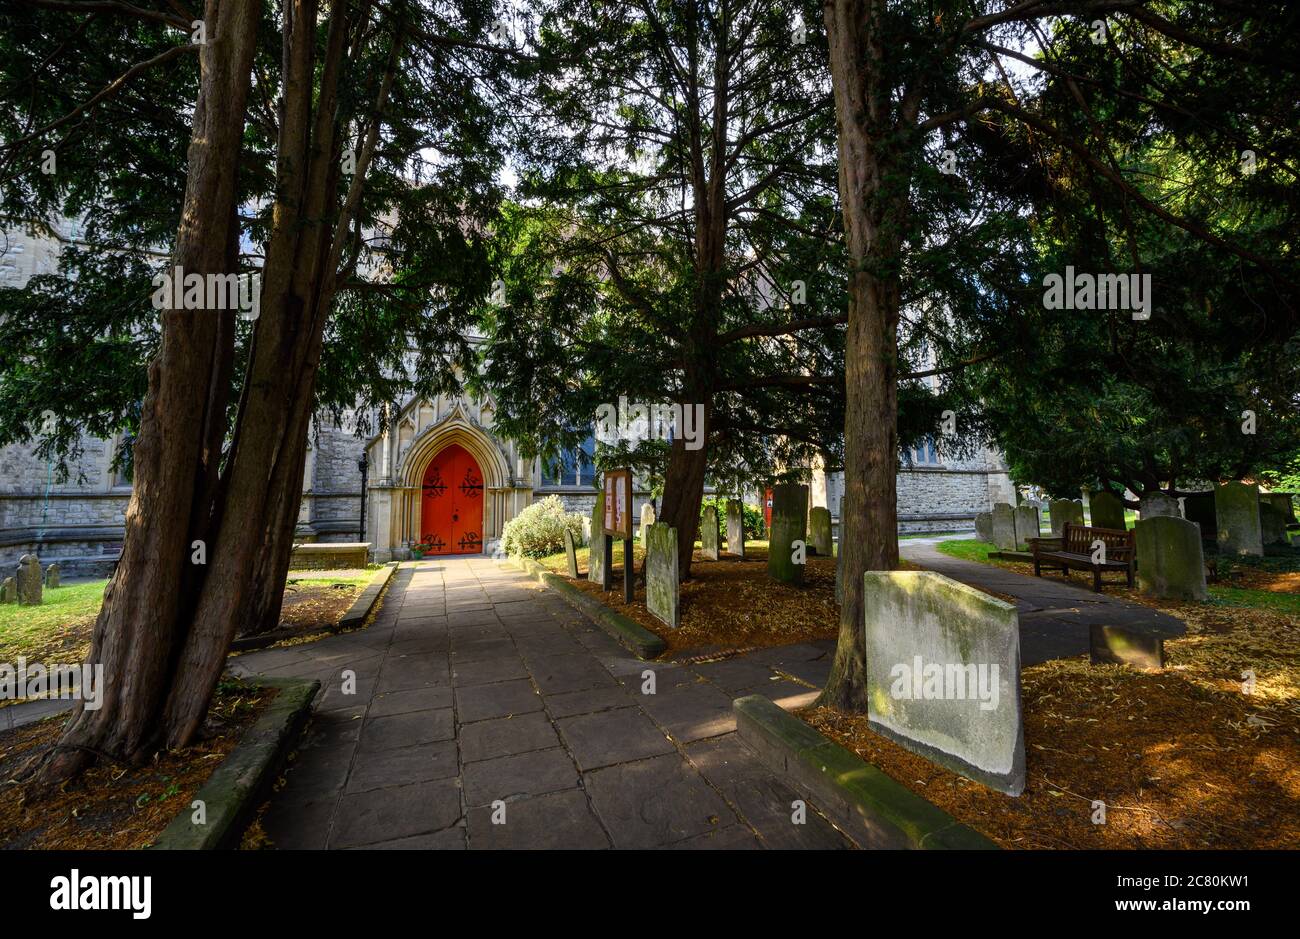 Beckenham (Greater London), Kent, UK. St George's Church in Beckenham with churchyard and path to main entrance. St George's is a parish church. Stock Photo